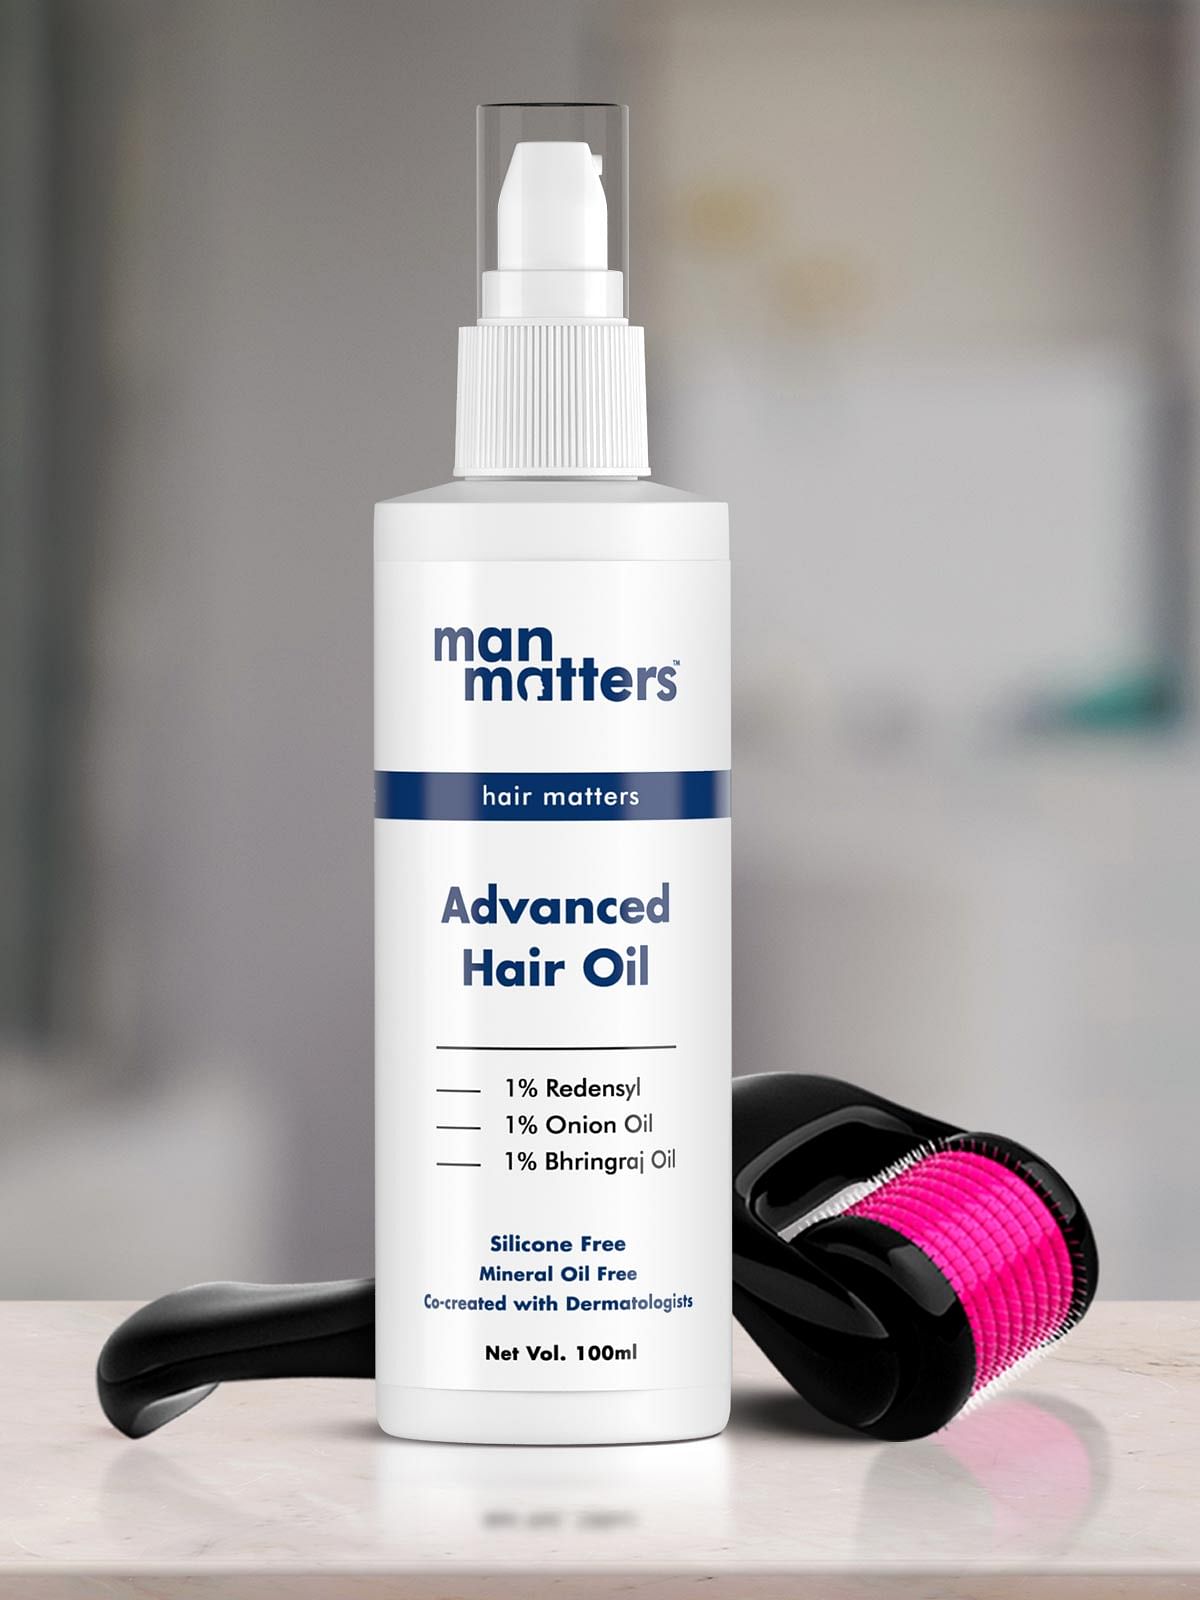 Buy Man Matters Hair Growth Oil for MenOnion Oil with Deep Root Applicator   Derma Roller 05mm for Hair Regrowth5 Ayurvedic  Powerful Oils  540 mm  Microneedles to Reduce Hairfall 